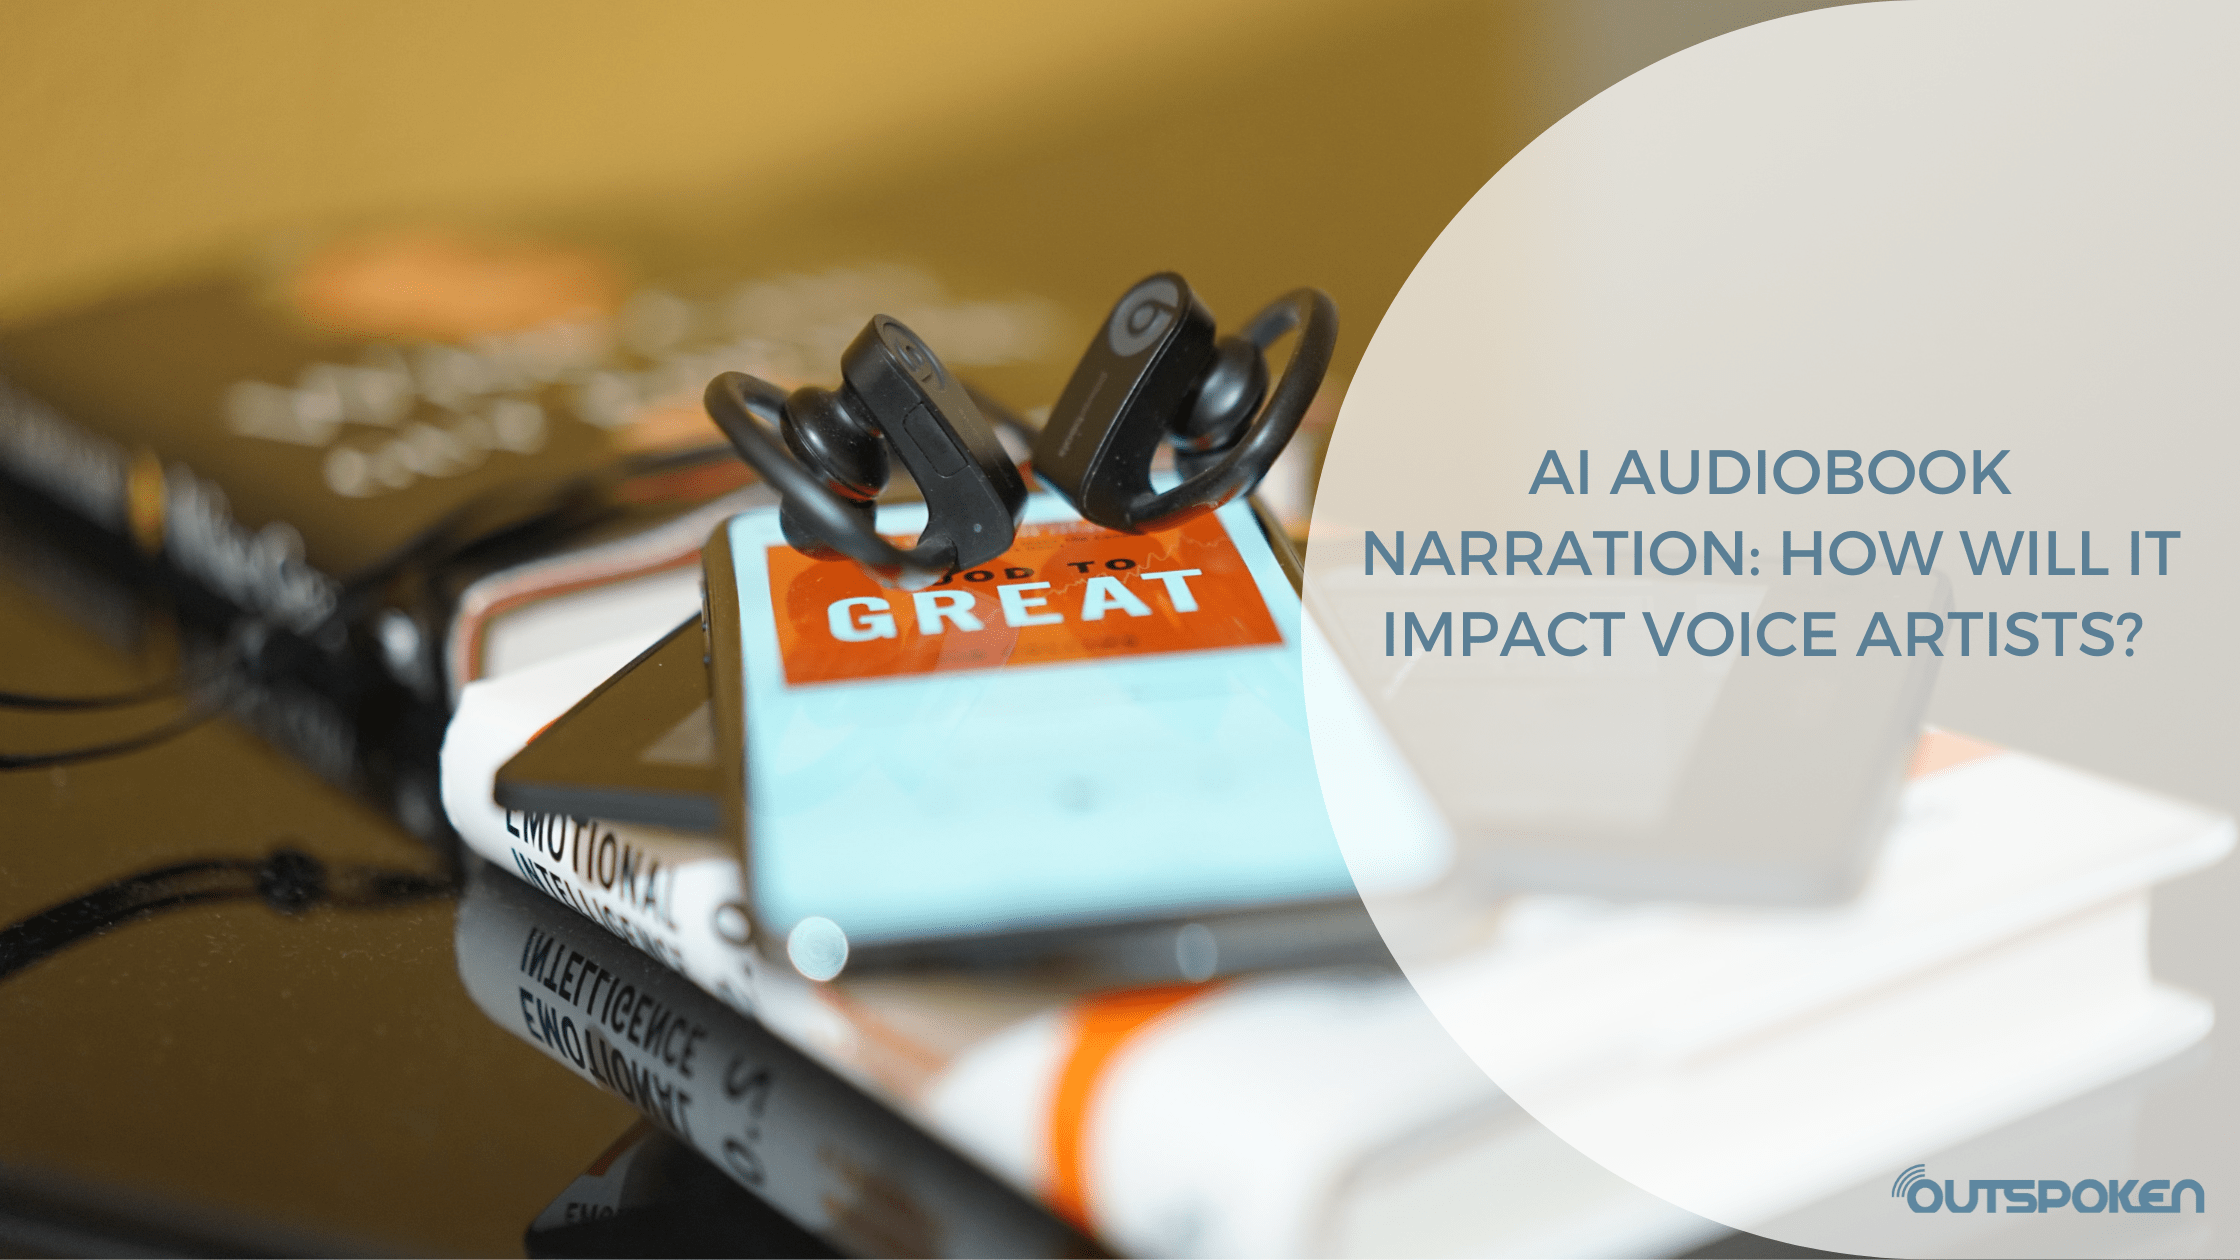 AI Audiobook Narration: How Will It Impact Voice Artists?